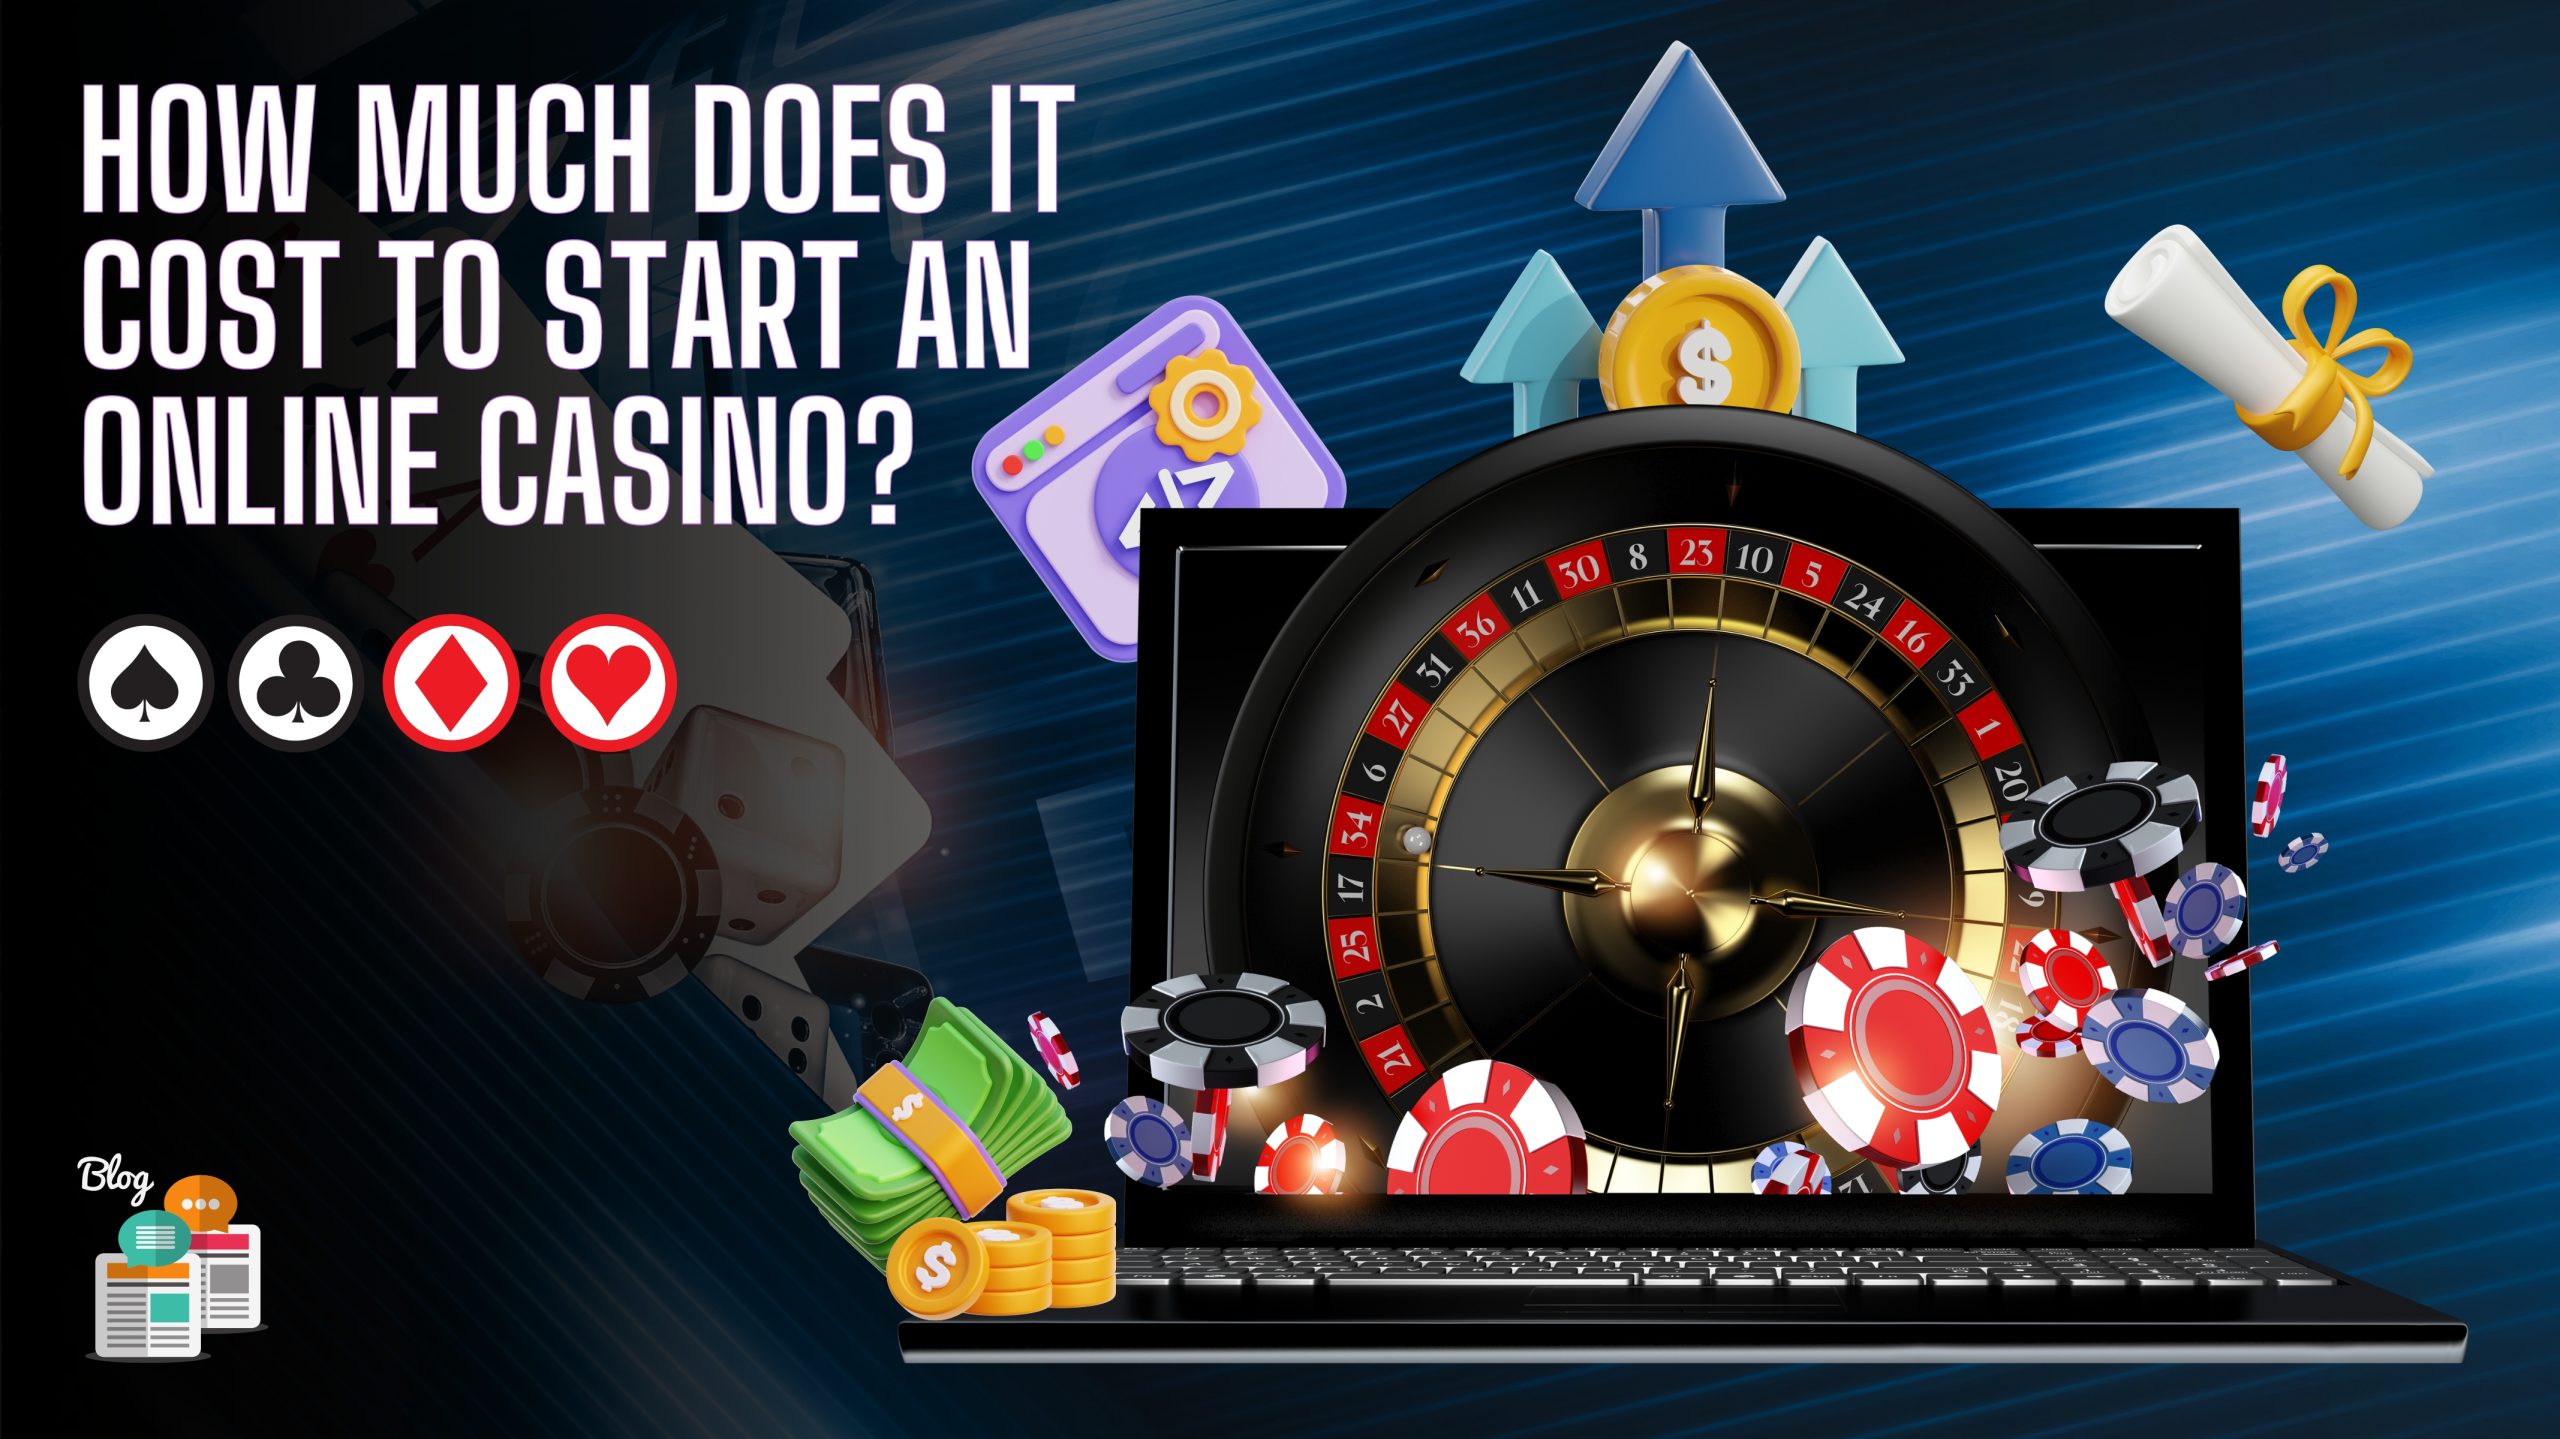 How Much Does It Cost To Start An Online Casino Scaled 